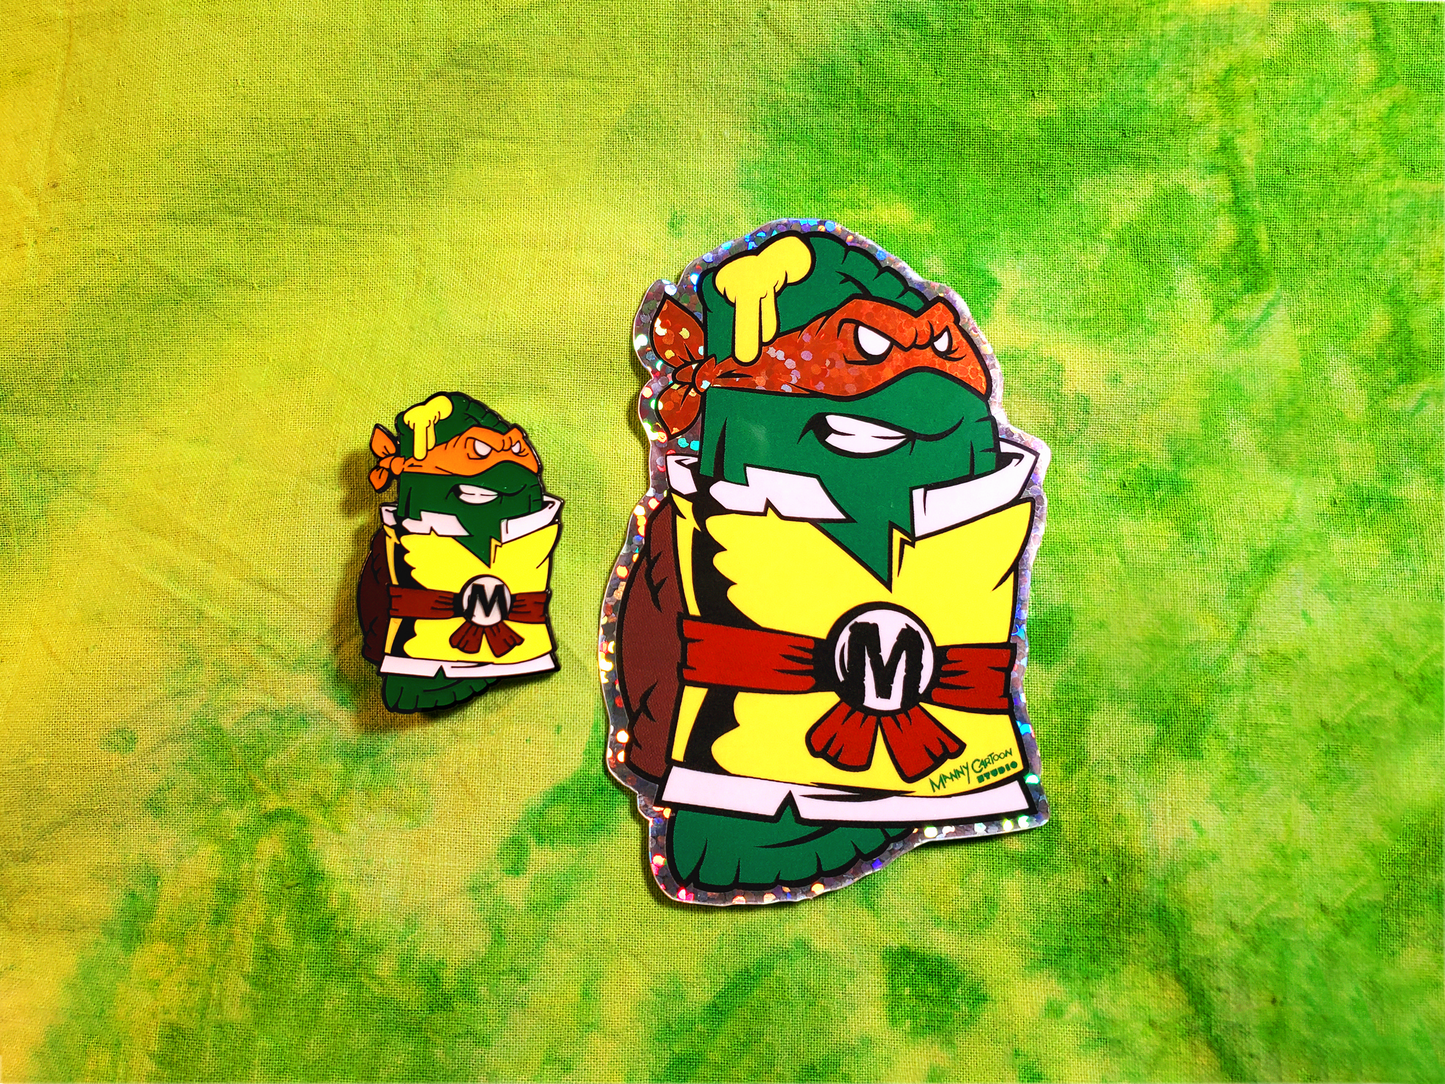 Turtle Pies Pin & Sticker Combo Pack